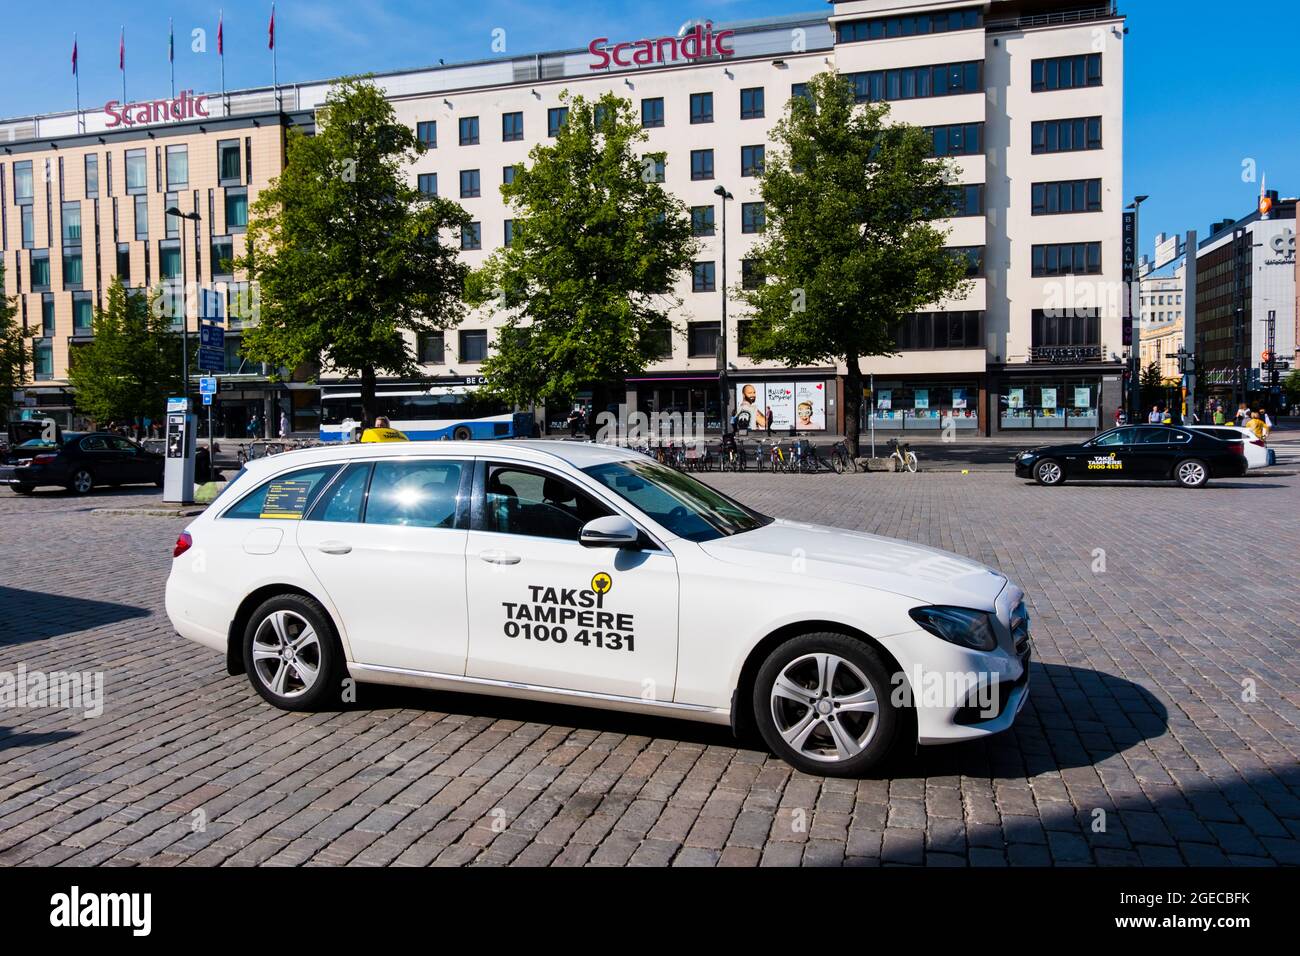 Taxi, in front of the railway station, Tampere, Finland Stock Photo - Alamy